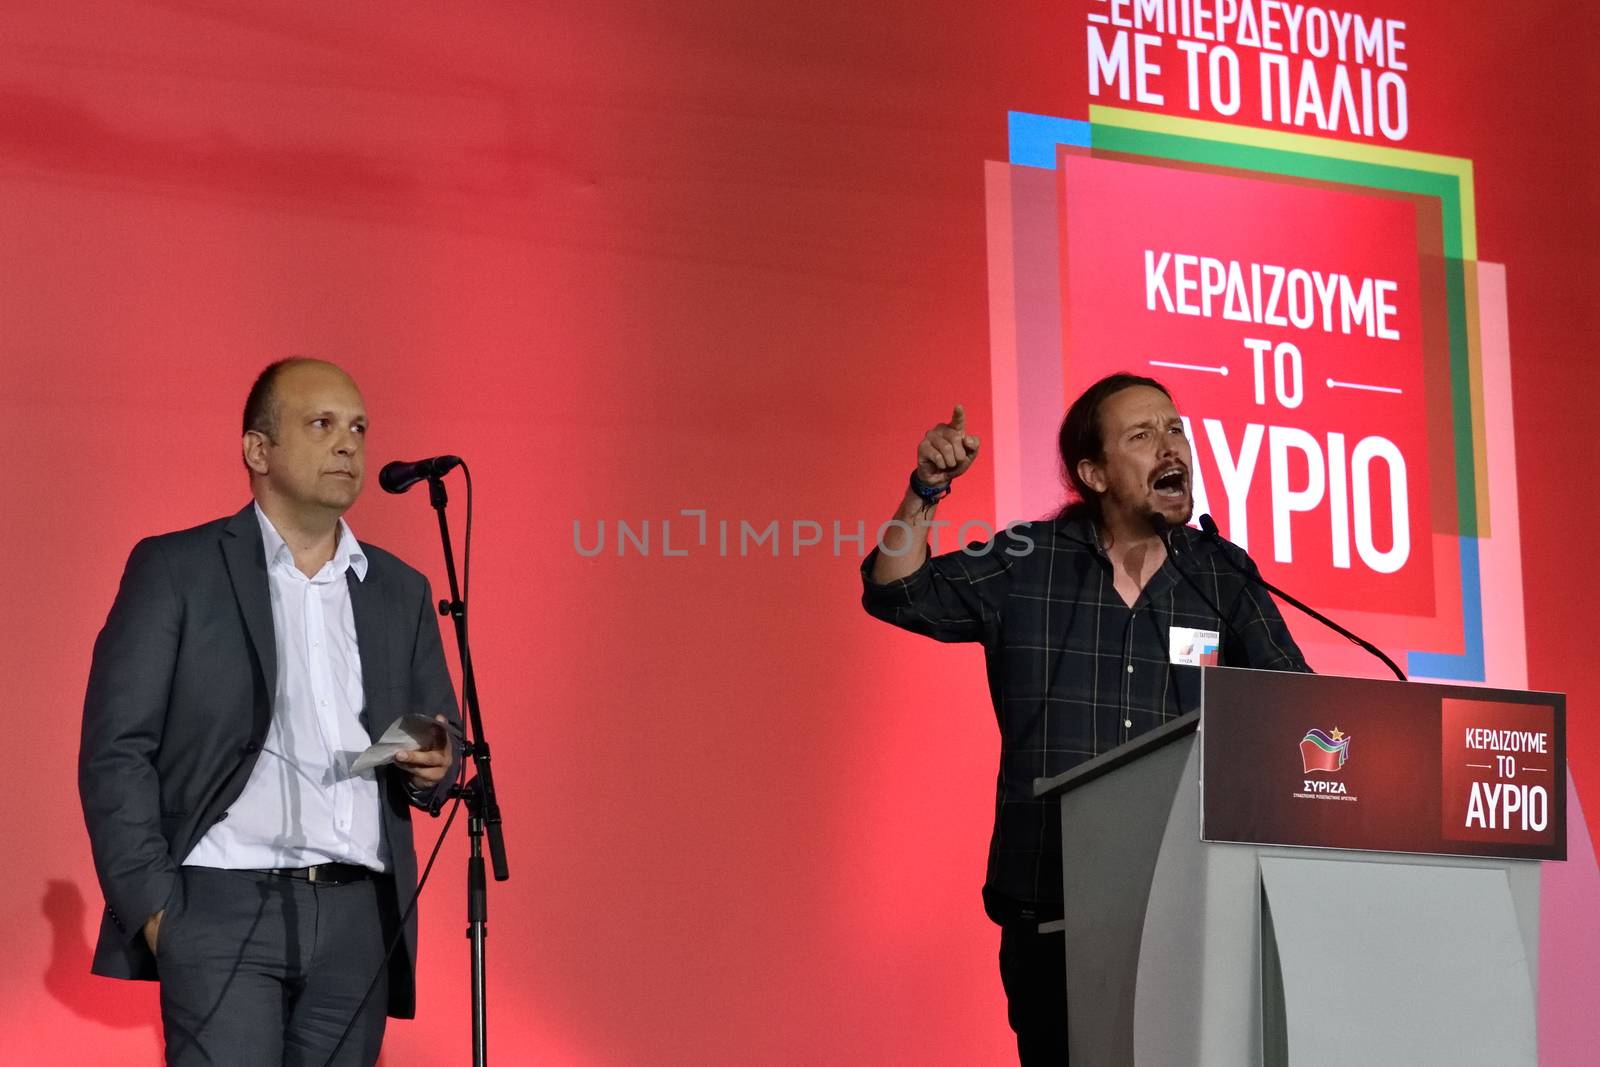 GREECE, Athens: Pablo Iglesias (R) of the Spanish anti-austerity Podemos party speaks to Syriza party supporters during the party's main election campaign rally in Athens, Greece on September 18, 2015. The Greek General Election will be held on September 20